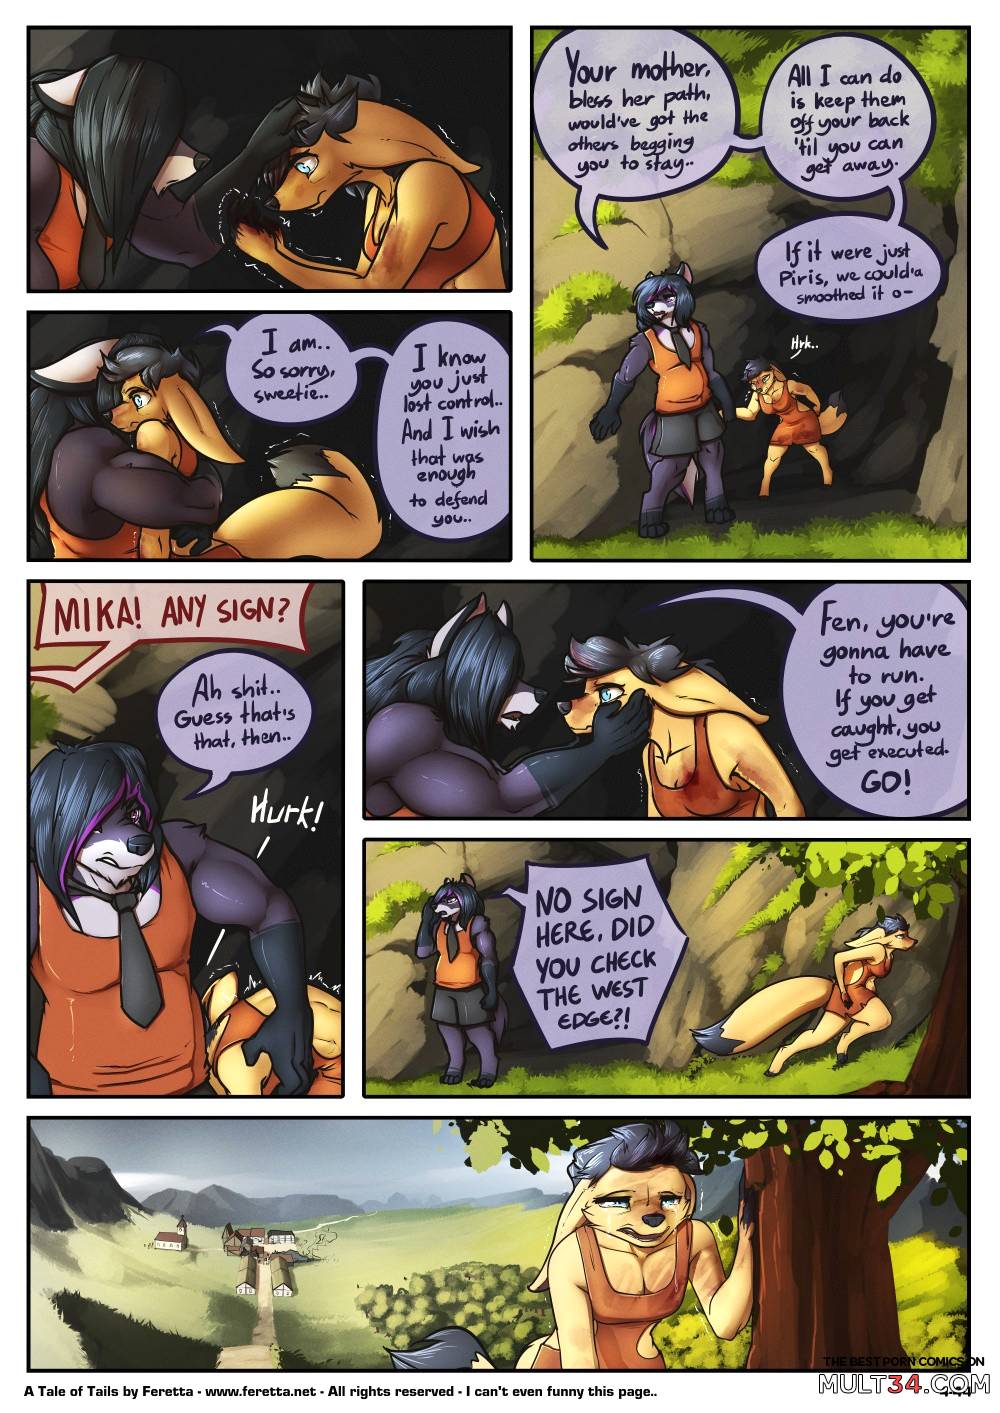 A Tale of Tails 4 - Matters of the mind page 44